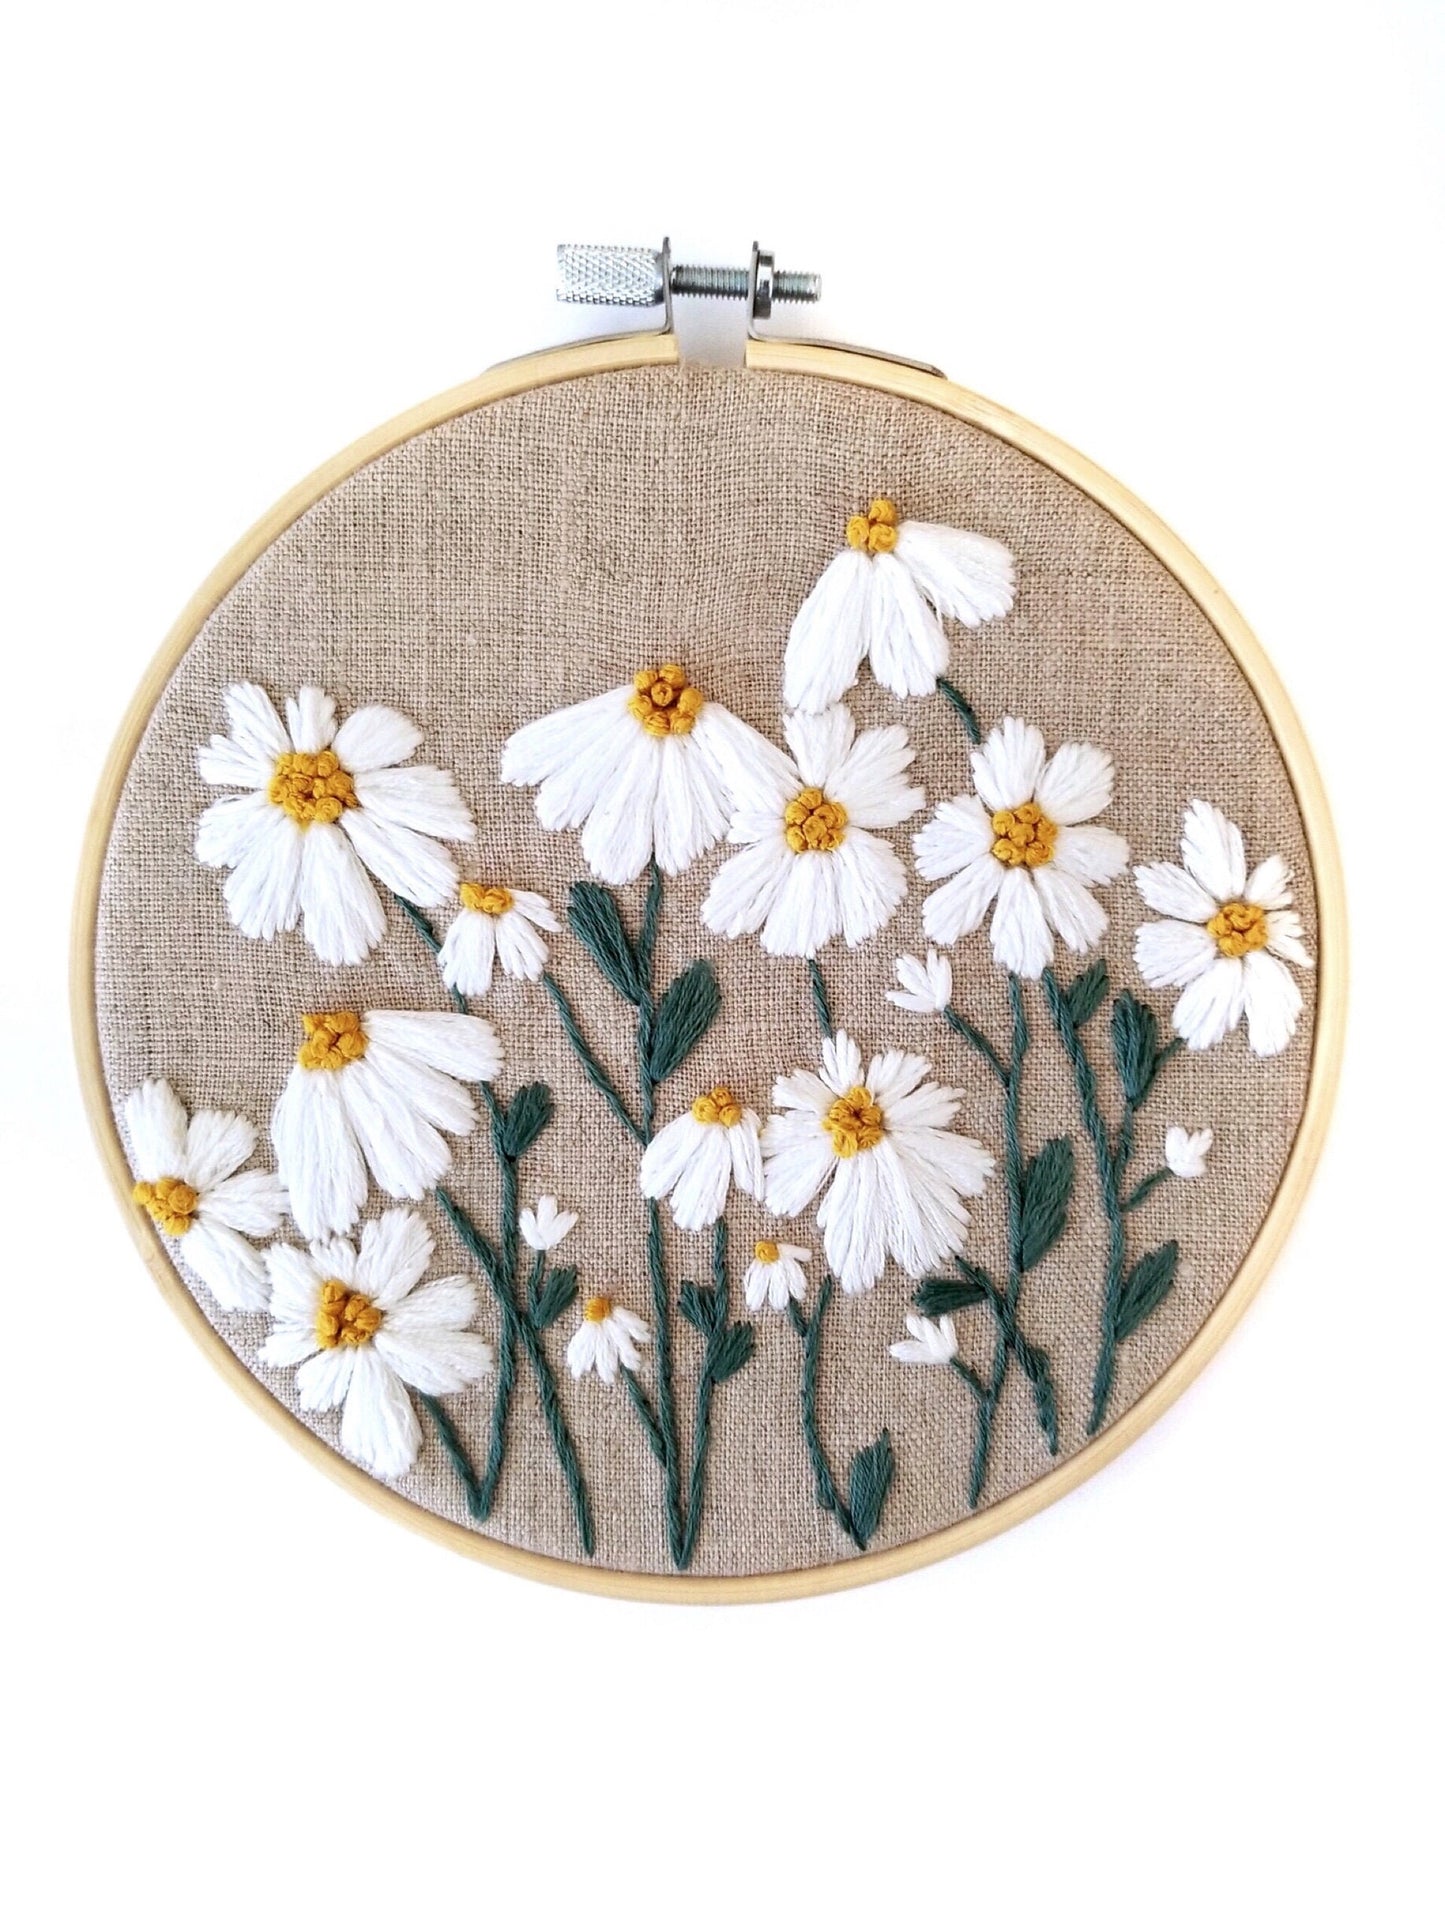 Wild Daisies PDF Embroidery Pattern